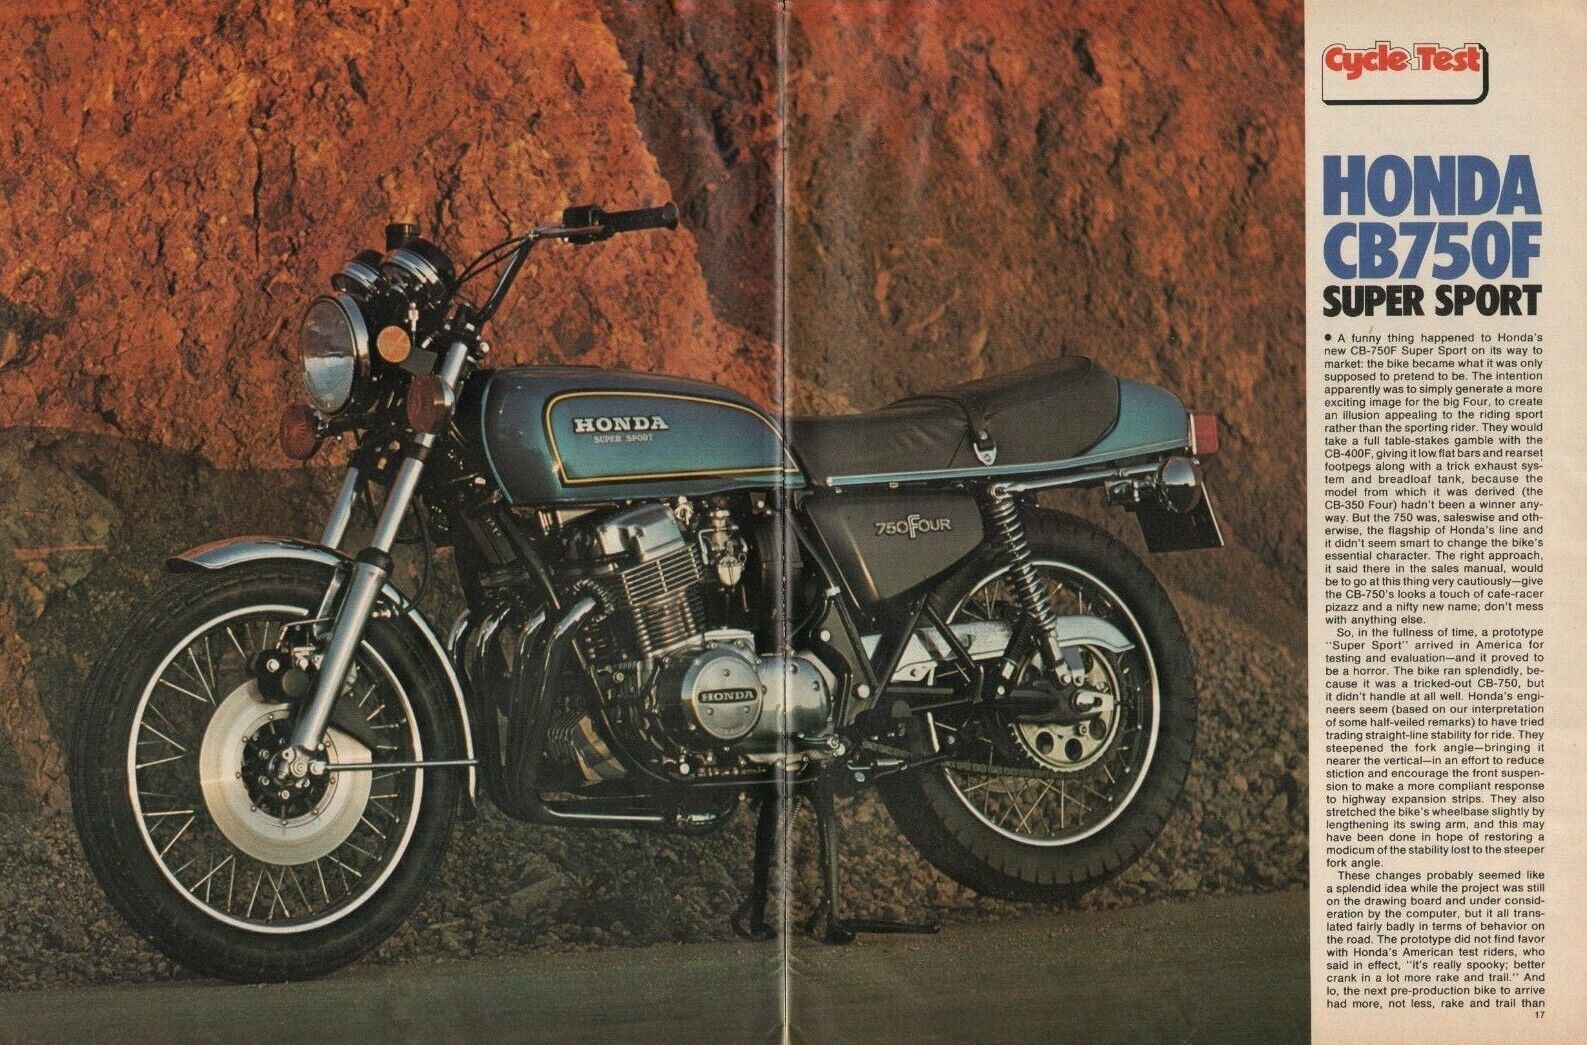 1975 Honda CB750F Super Sport - 9-Page Vintage Motorcycle Road Test Article